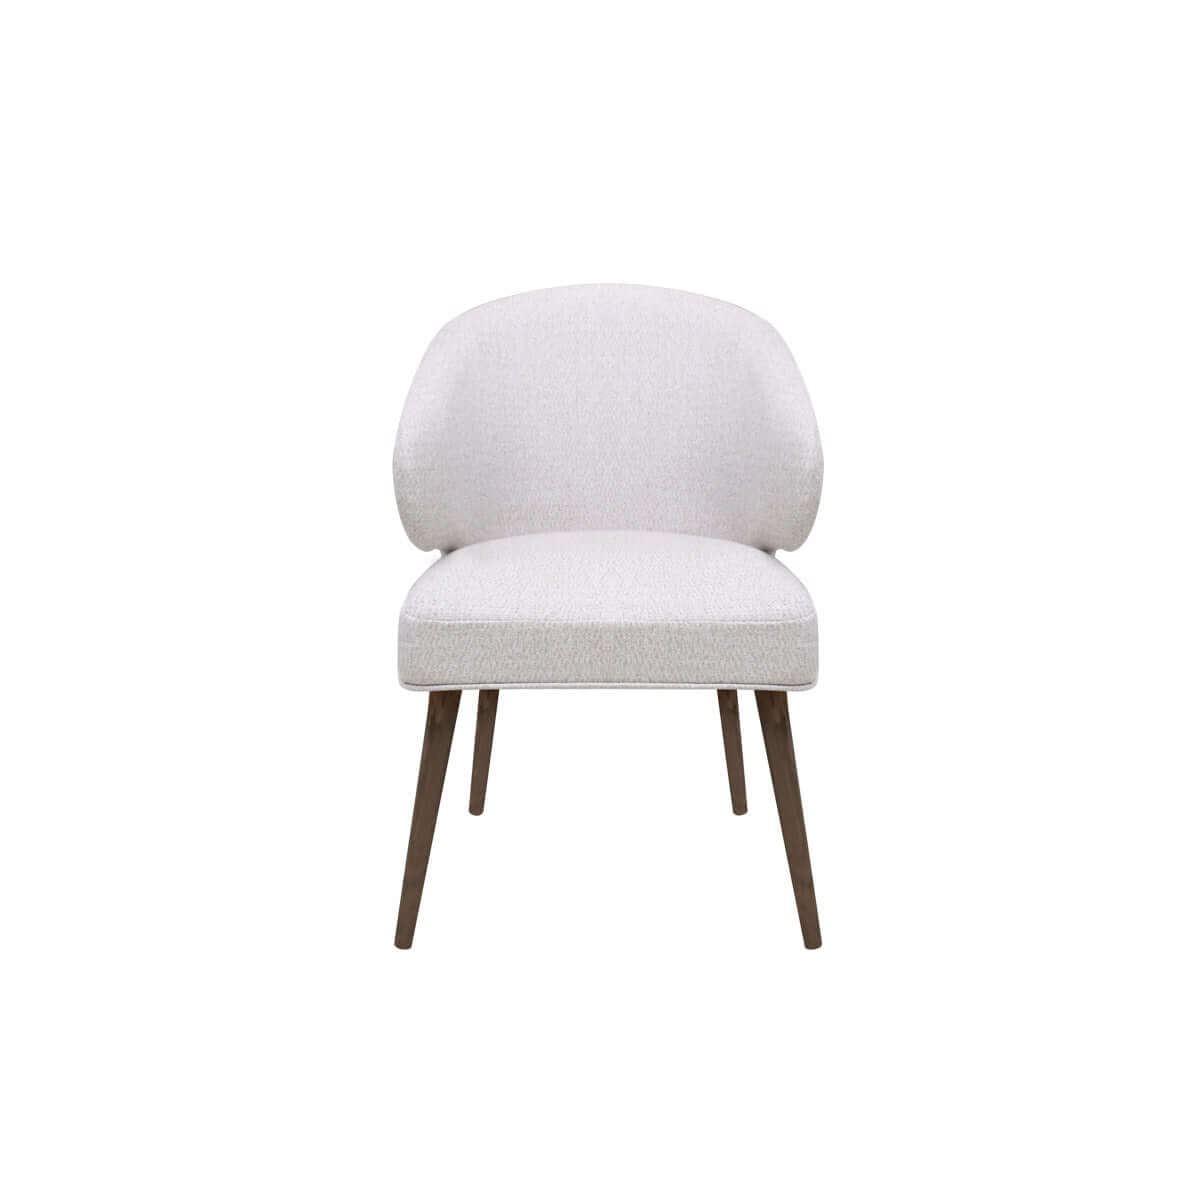 indonesia online furniture - dining chair with curved, lower backrest